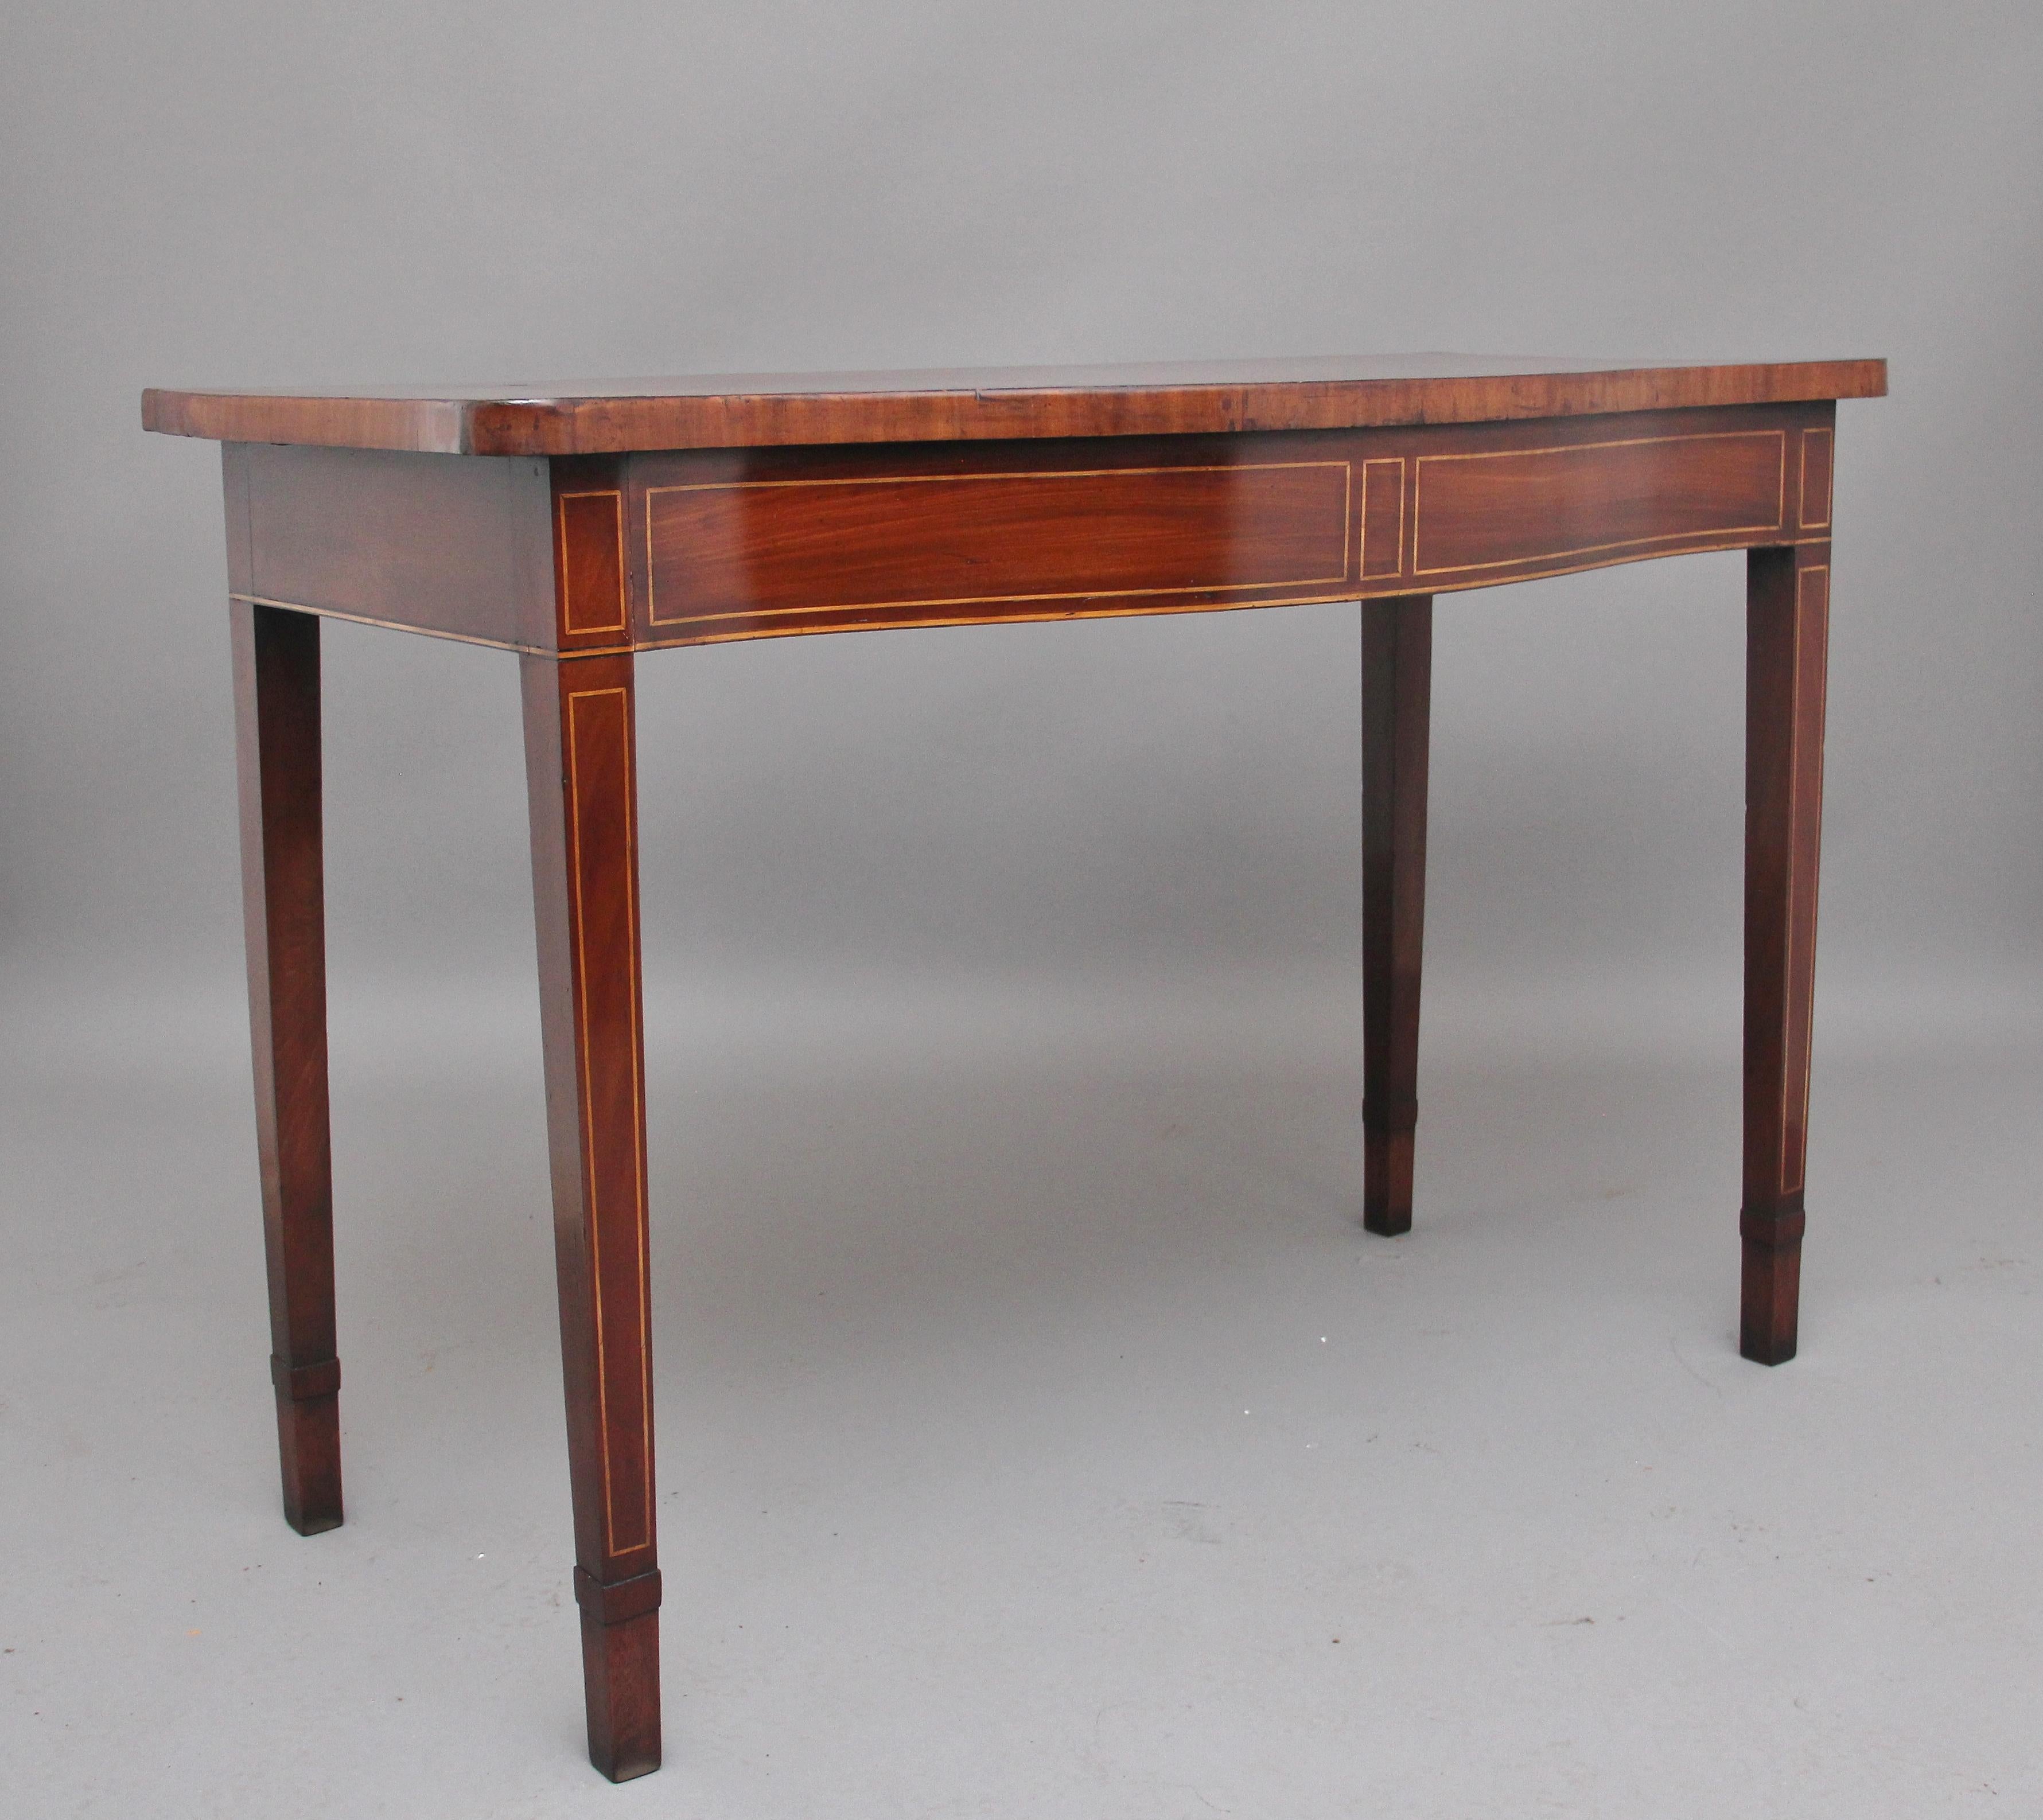 18th century mahogany inlaid serpentine serving table, the shaped crossbanded top having lovely figuration, the frieze below decorated with box wood inlay, supported on four square tapering inlaid legs. Circa 1790.
 